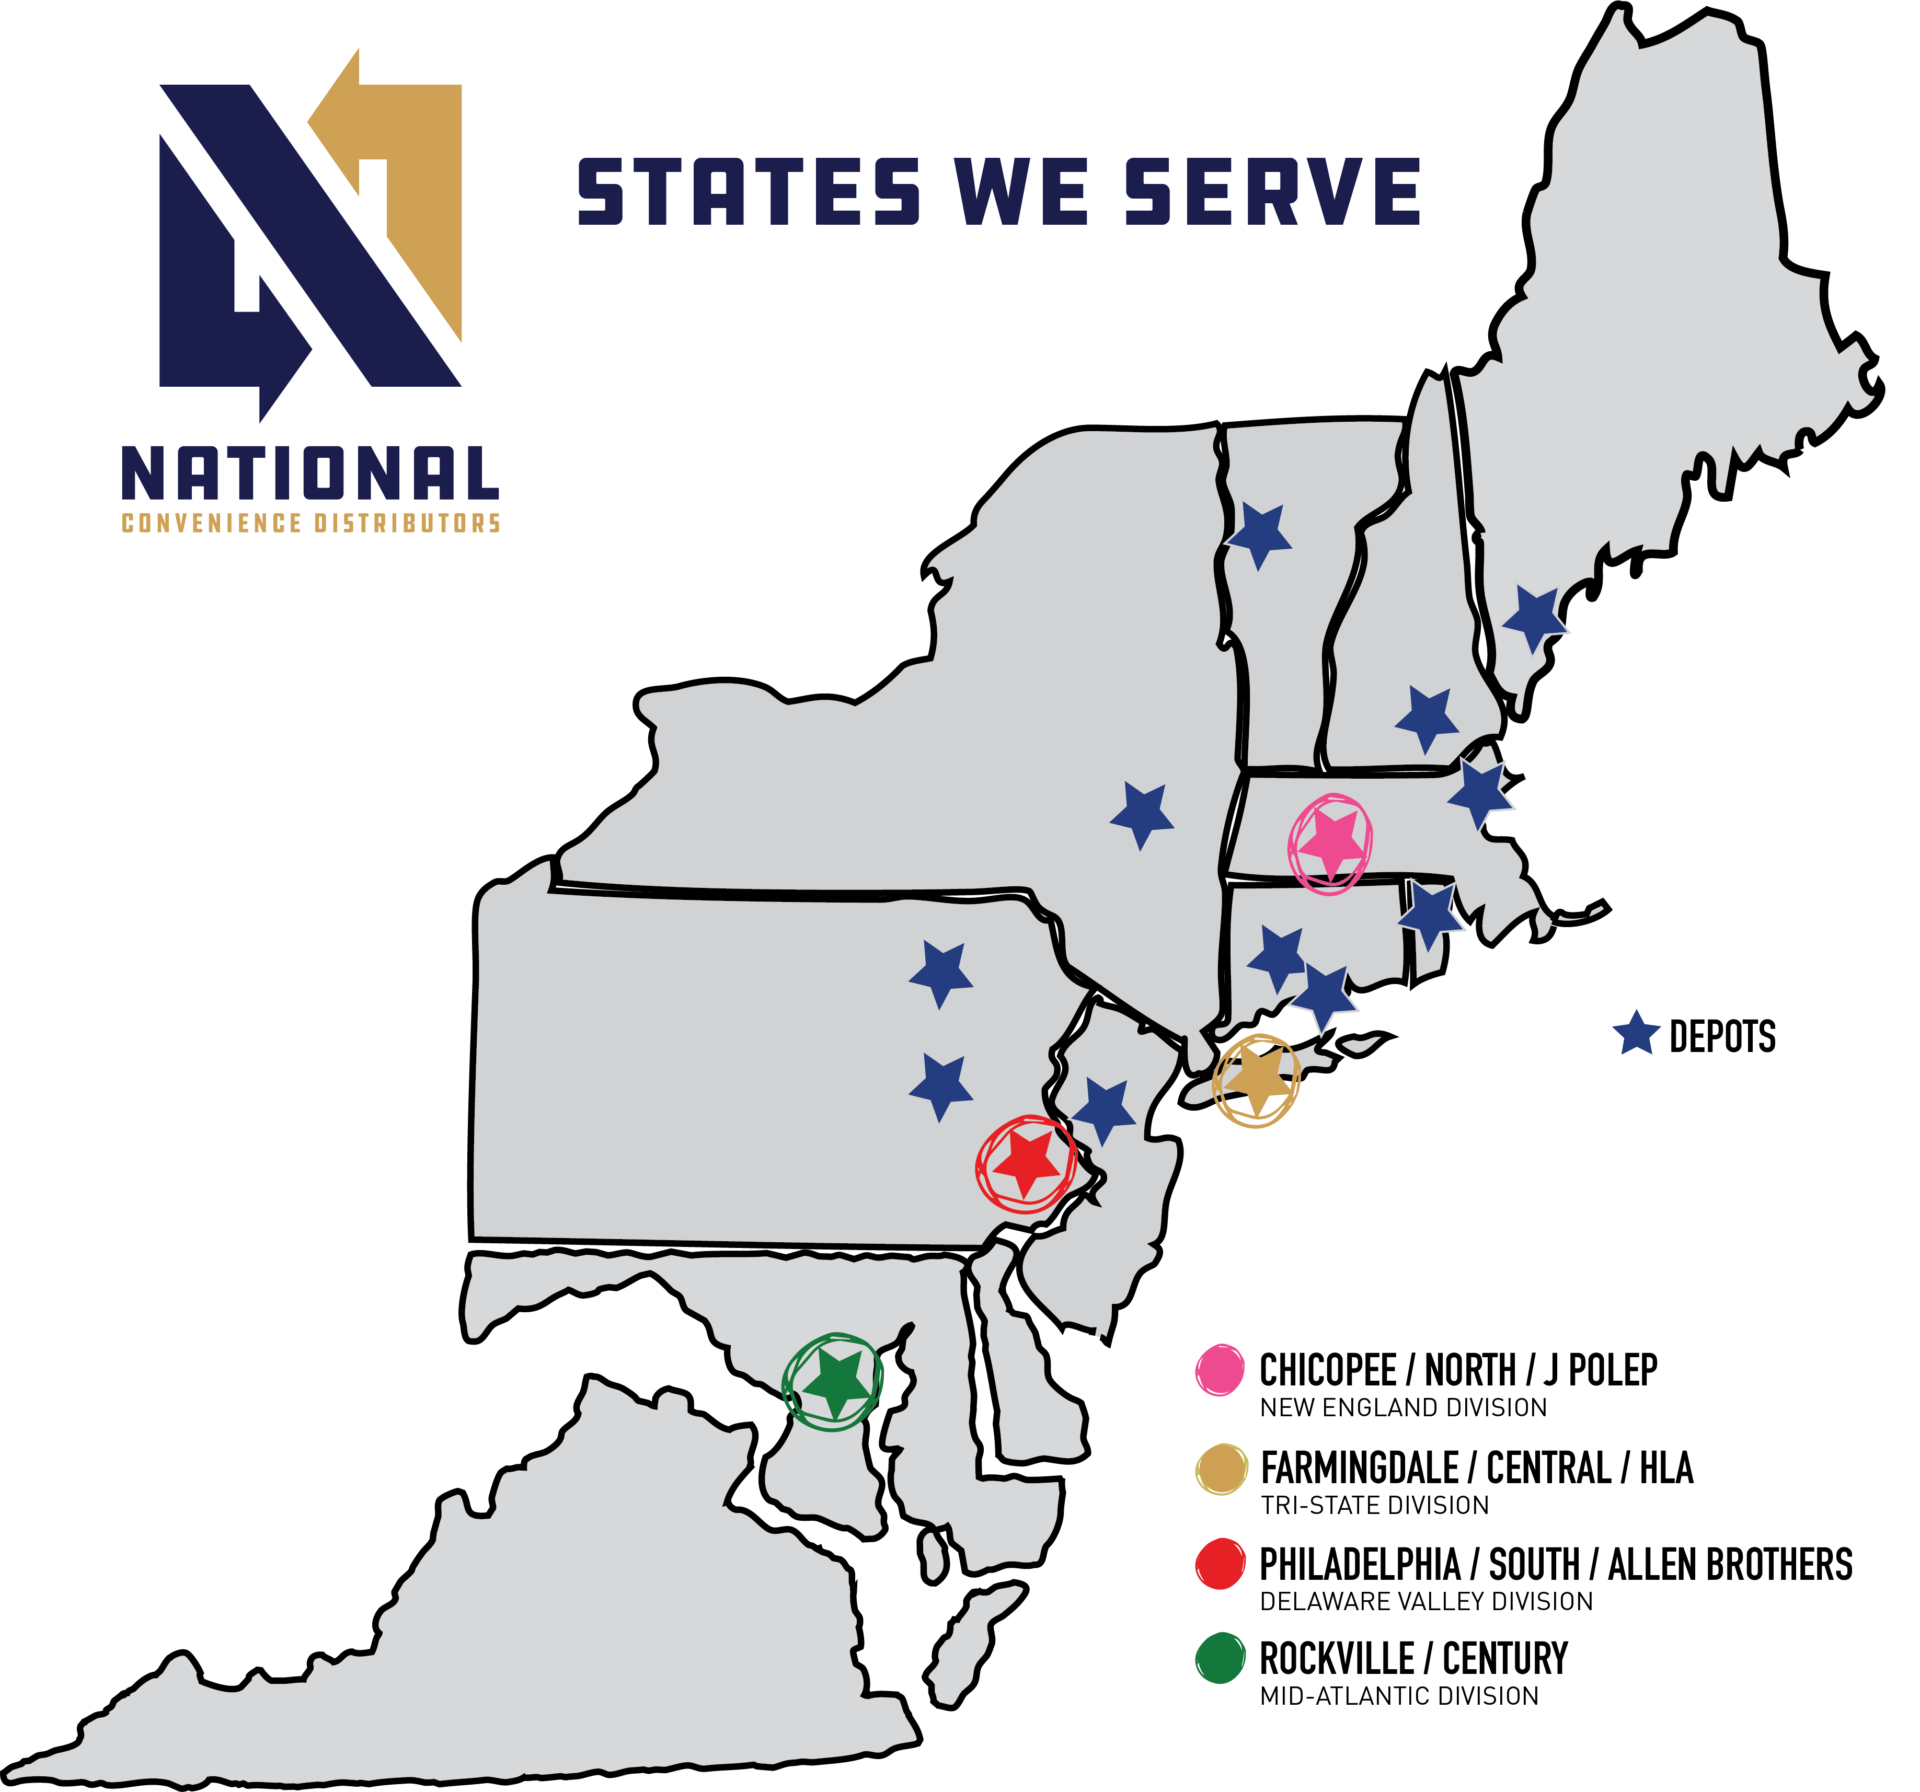 States-we-serve-small